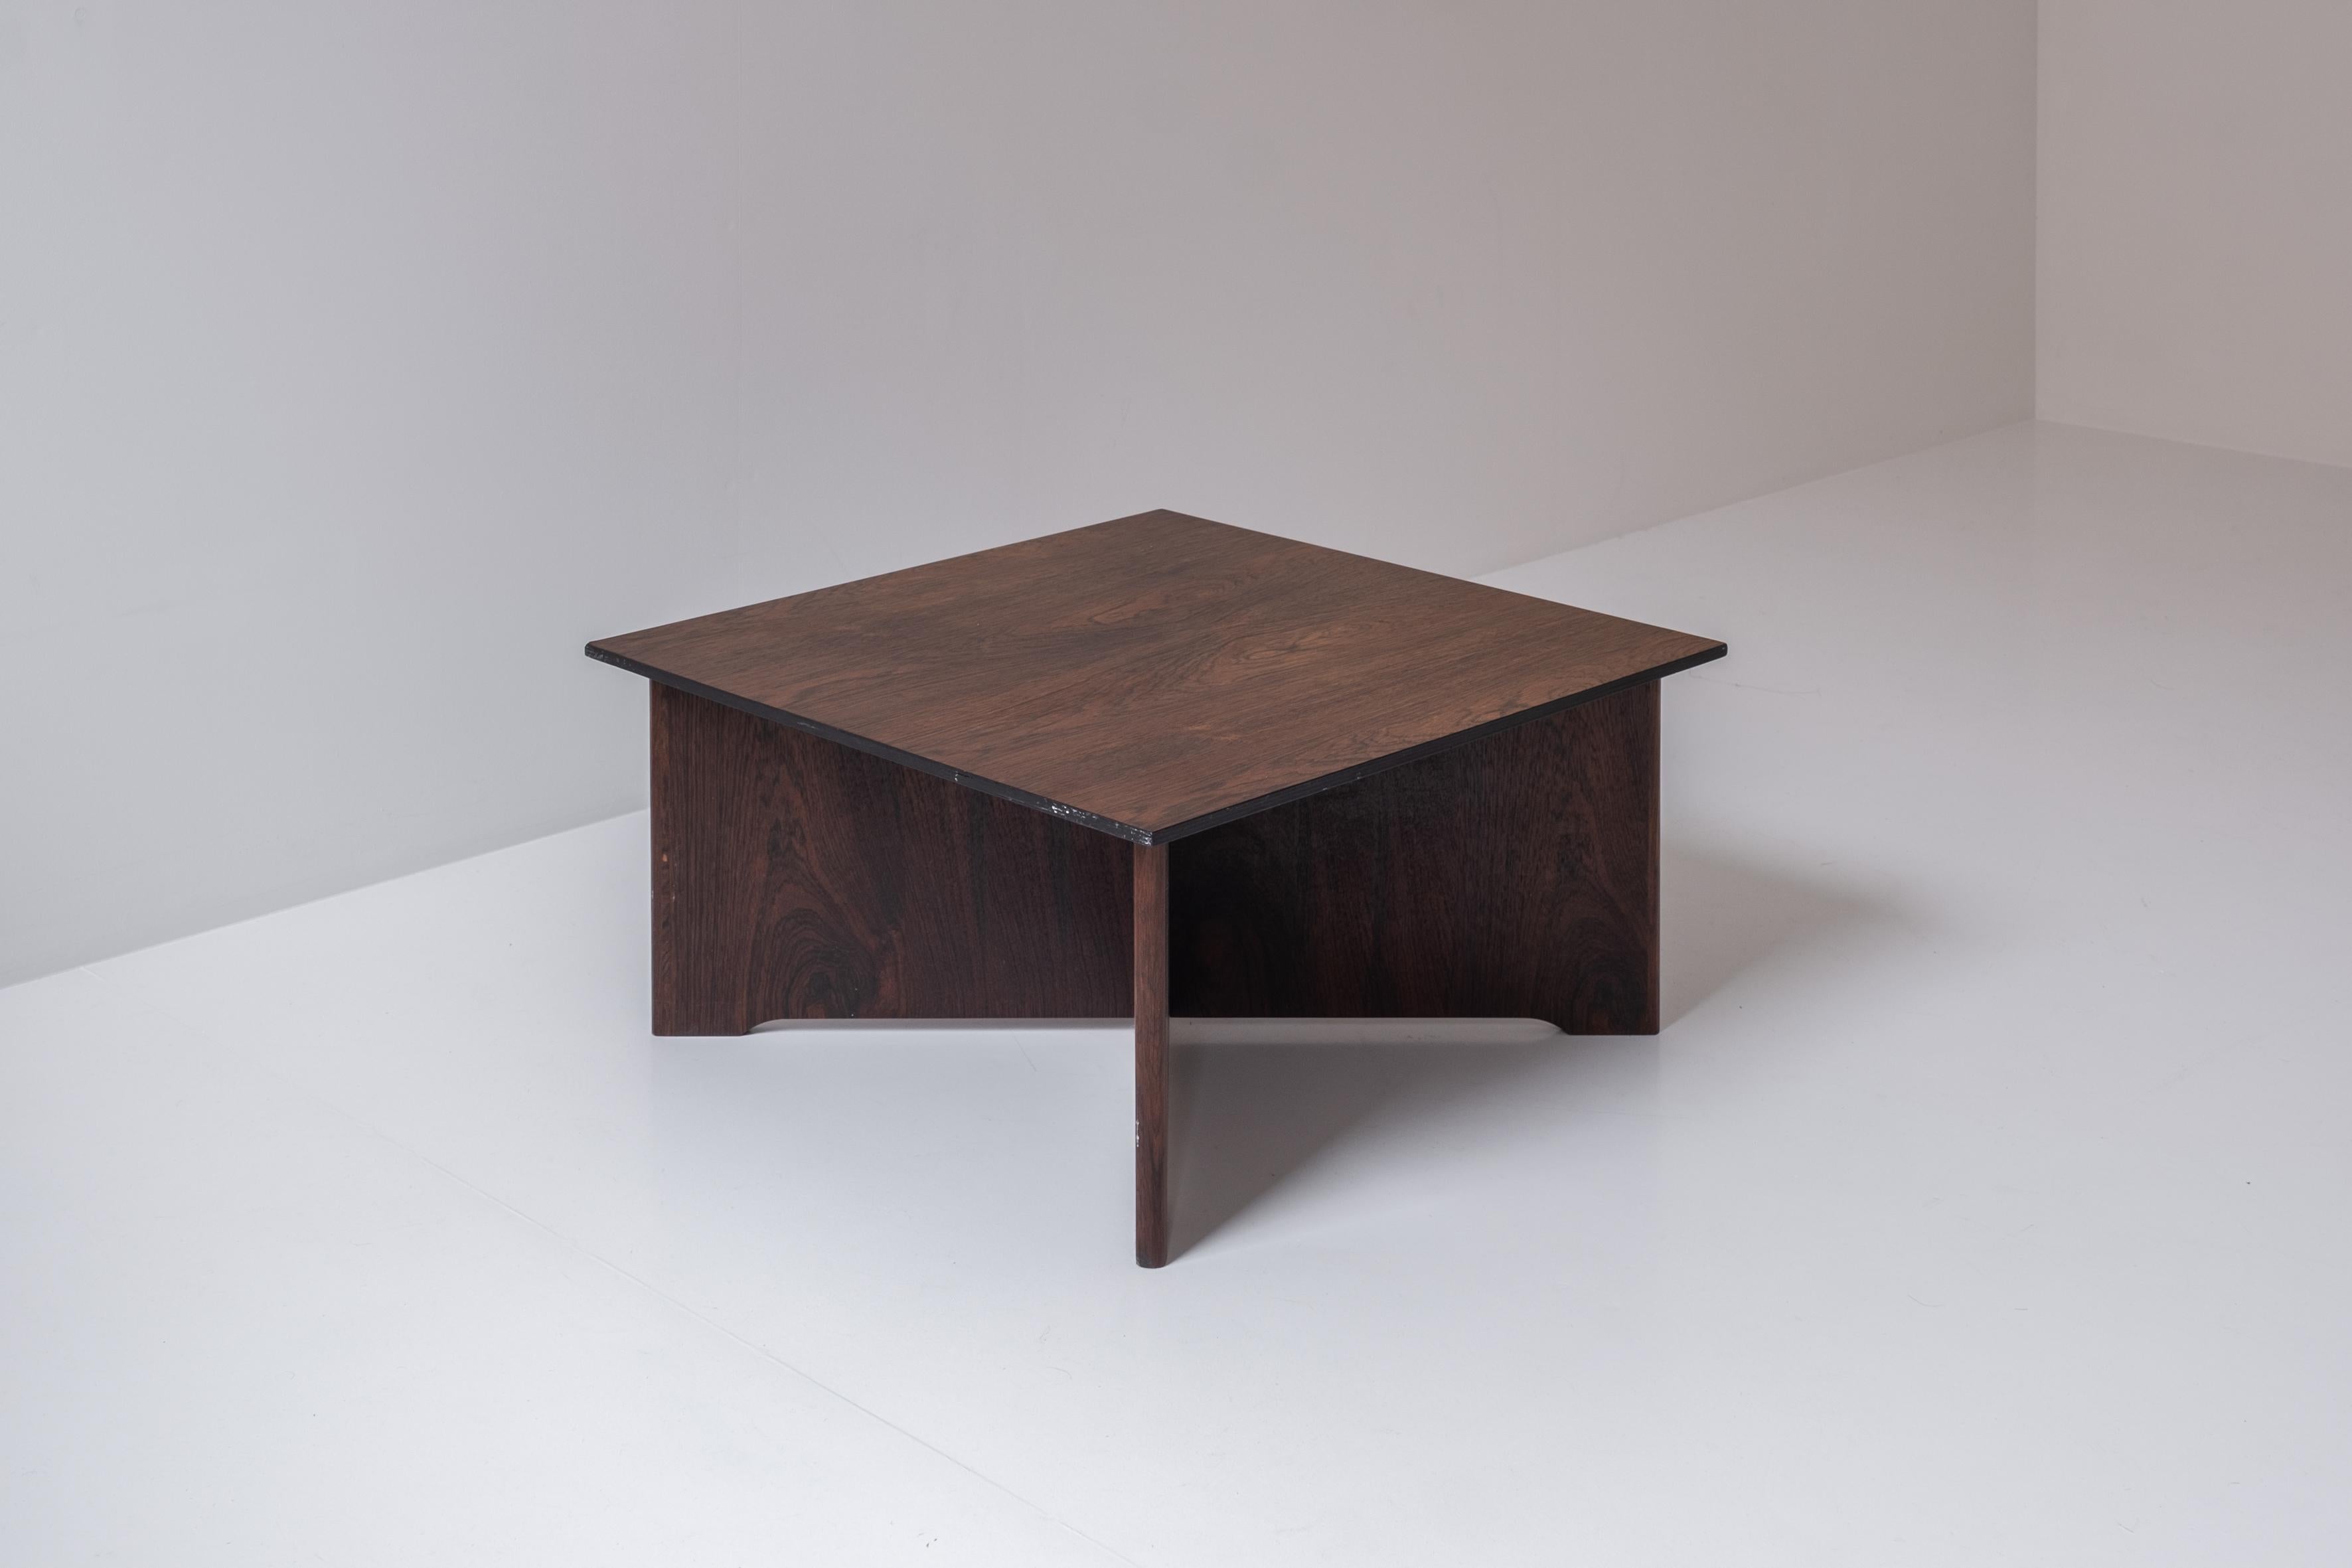 Rosewood Square Coffee Table from Denmark, Designed in the 1960s For Sale